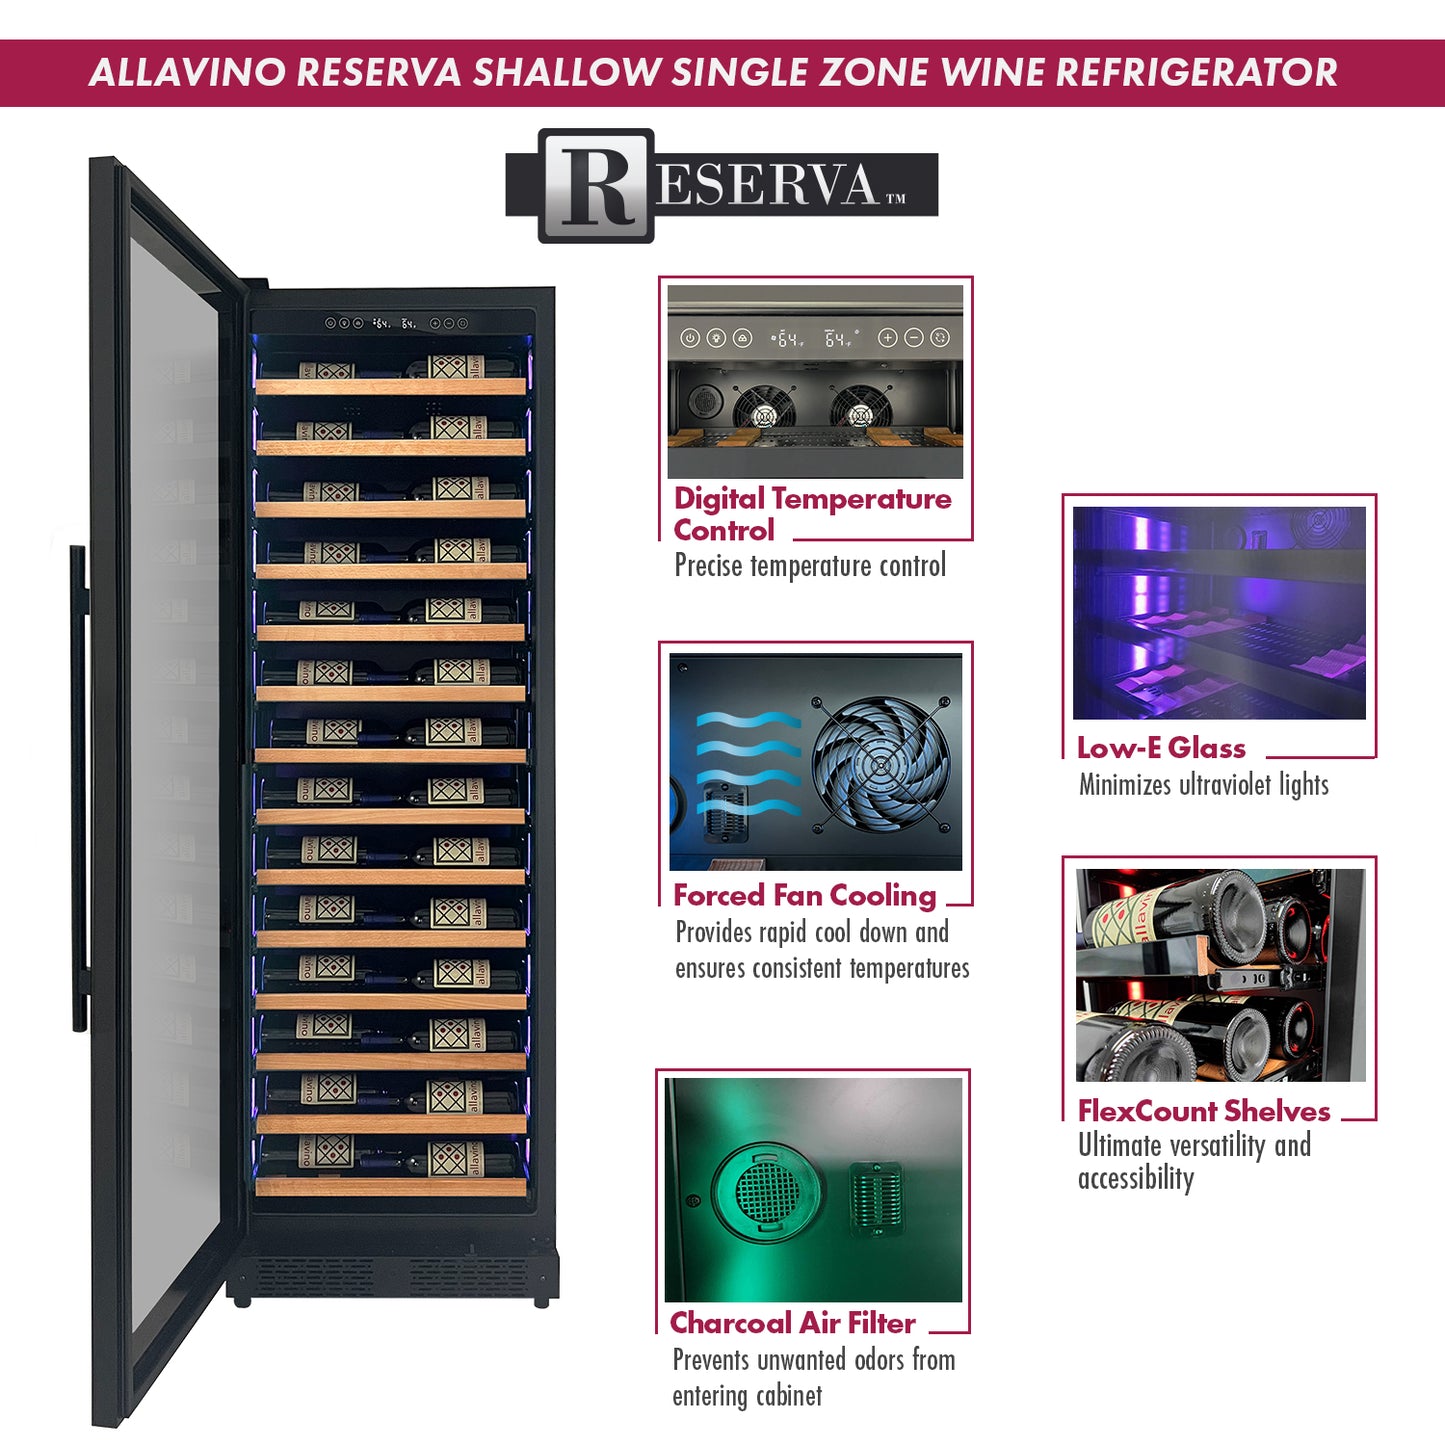 Allavino Reserva Series 67 bottle 71" Tall Single Zone Left Hinge Black Shallow Wine Refrigerator with Wood Front Shelves